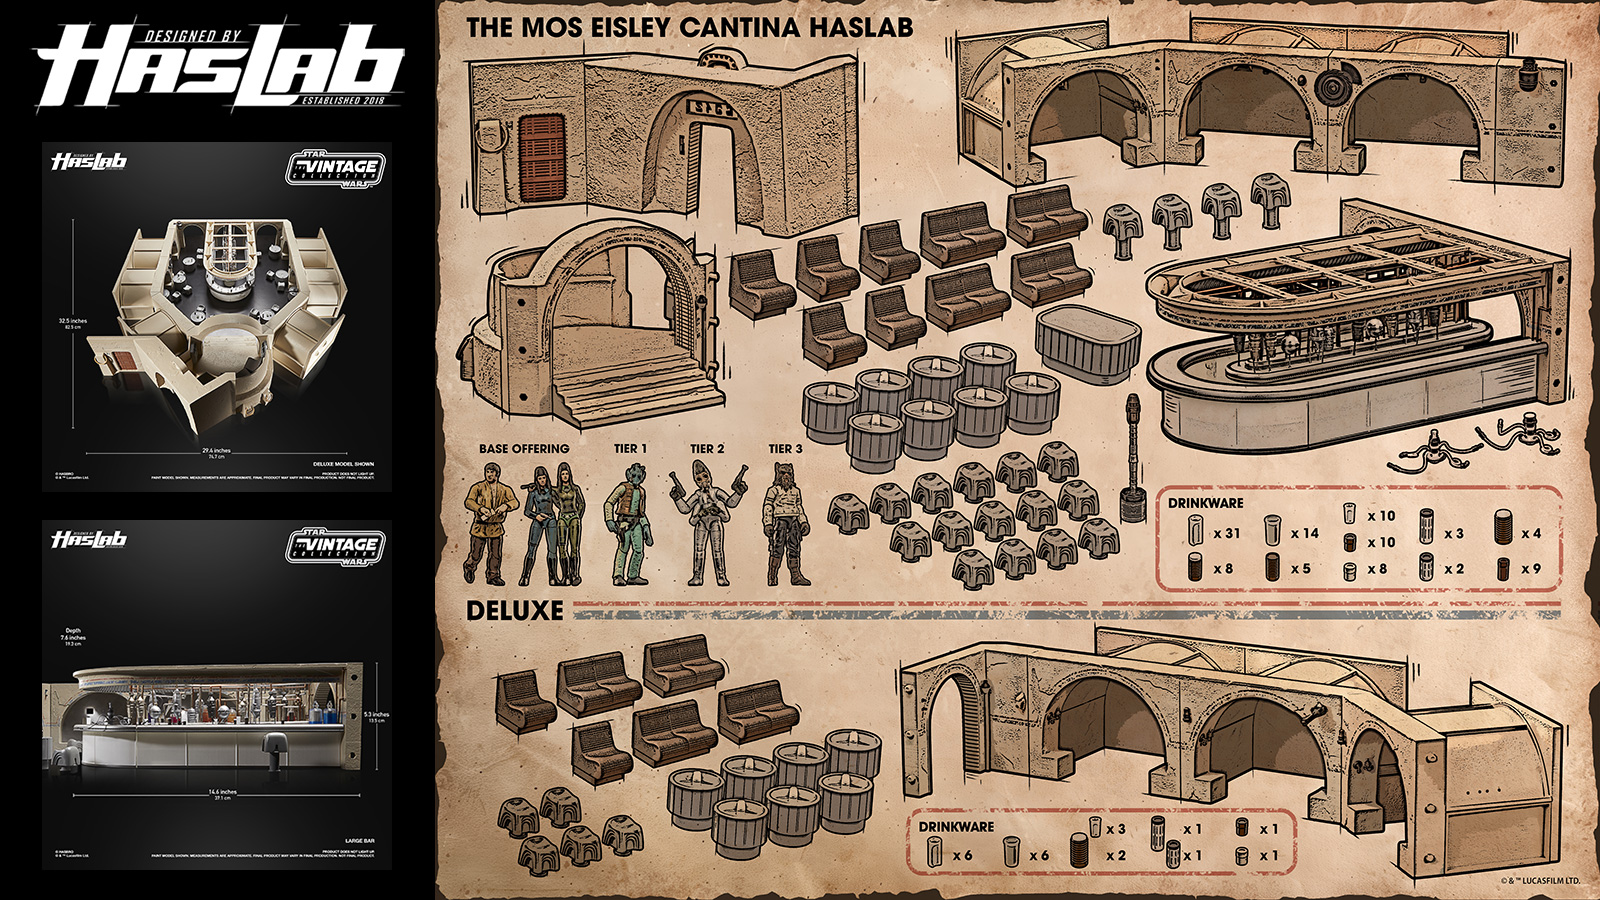 HasLab Mos Eisley Cantina Q&A With Hasbro - Same Packaging For Basic & Deluxe? Future Figures?